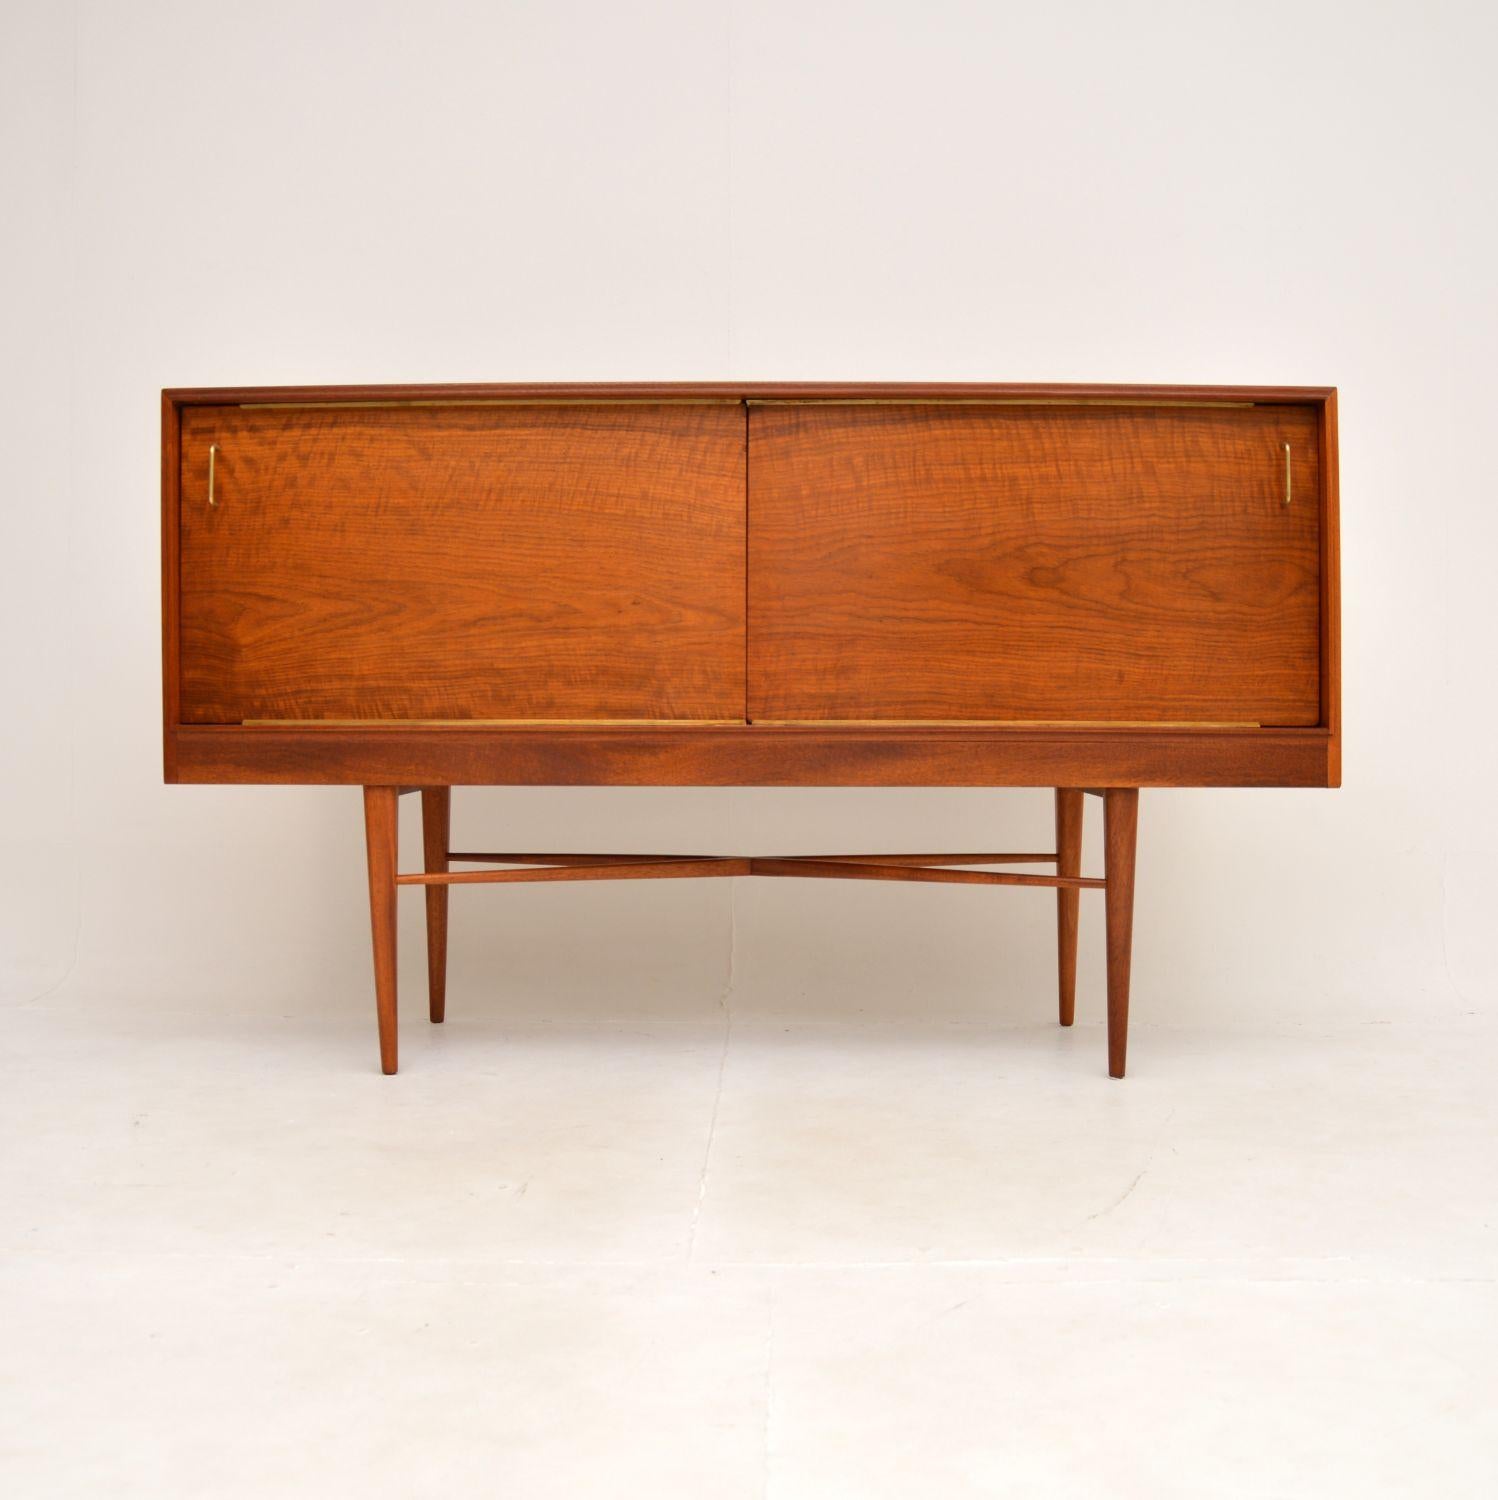 A beautiful and extremely rare vintage sideboard by Robert Heritage for Heal’s. This was made in England, it dates from the 1950’s.

The quality is exceptional, this has a very stylish and practical design. The carcass stands on beautifully tapered